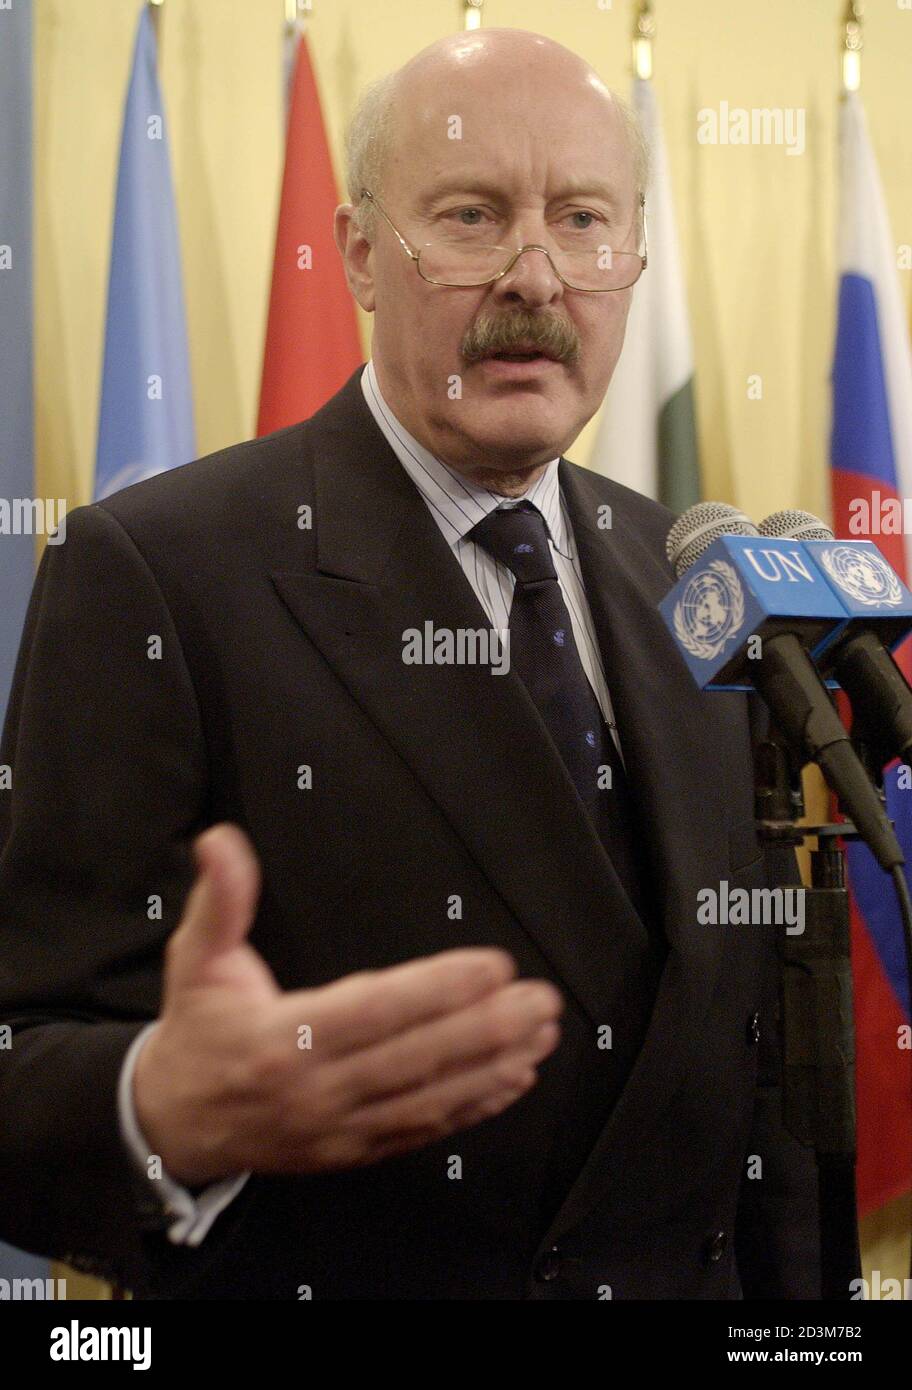 German Ambassador to the United Nations Gunter Pleuger speaks after a United Nations Security Council vote in New York, March 28, 2003. The U.N. Security Council on Friday voted unanimously to tap billions of dollars in Iraqi oil revenues to purchase food and medicine for Iraq's people who face a possible humanitarian crisis in the war. The 15-0 vote to restart the oil-for-food program, which provides basic goods to 60 percent of Iraq's 26 million people, came after a week of rancorous negotiations. REUTERS/Chip East  CME/GN Stock Photo